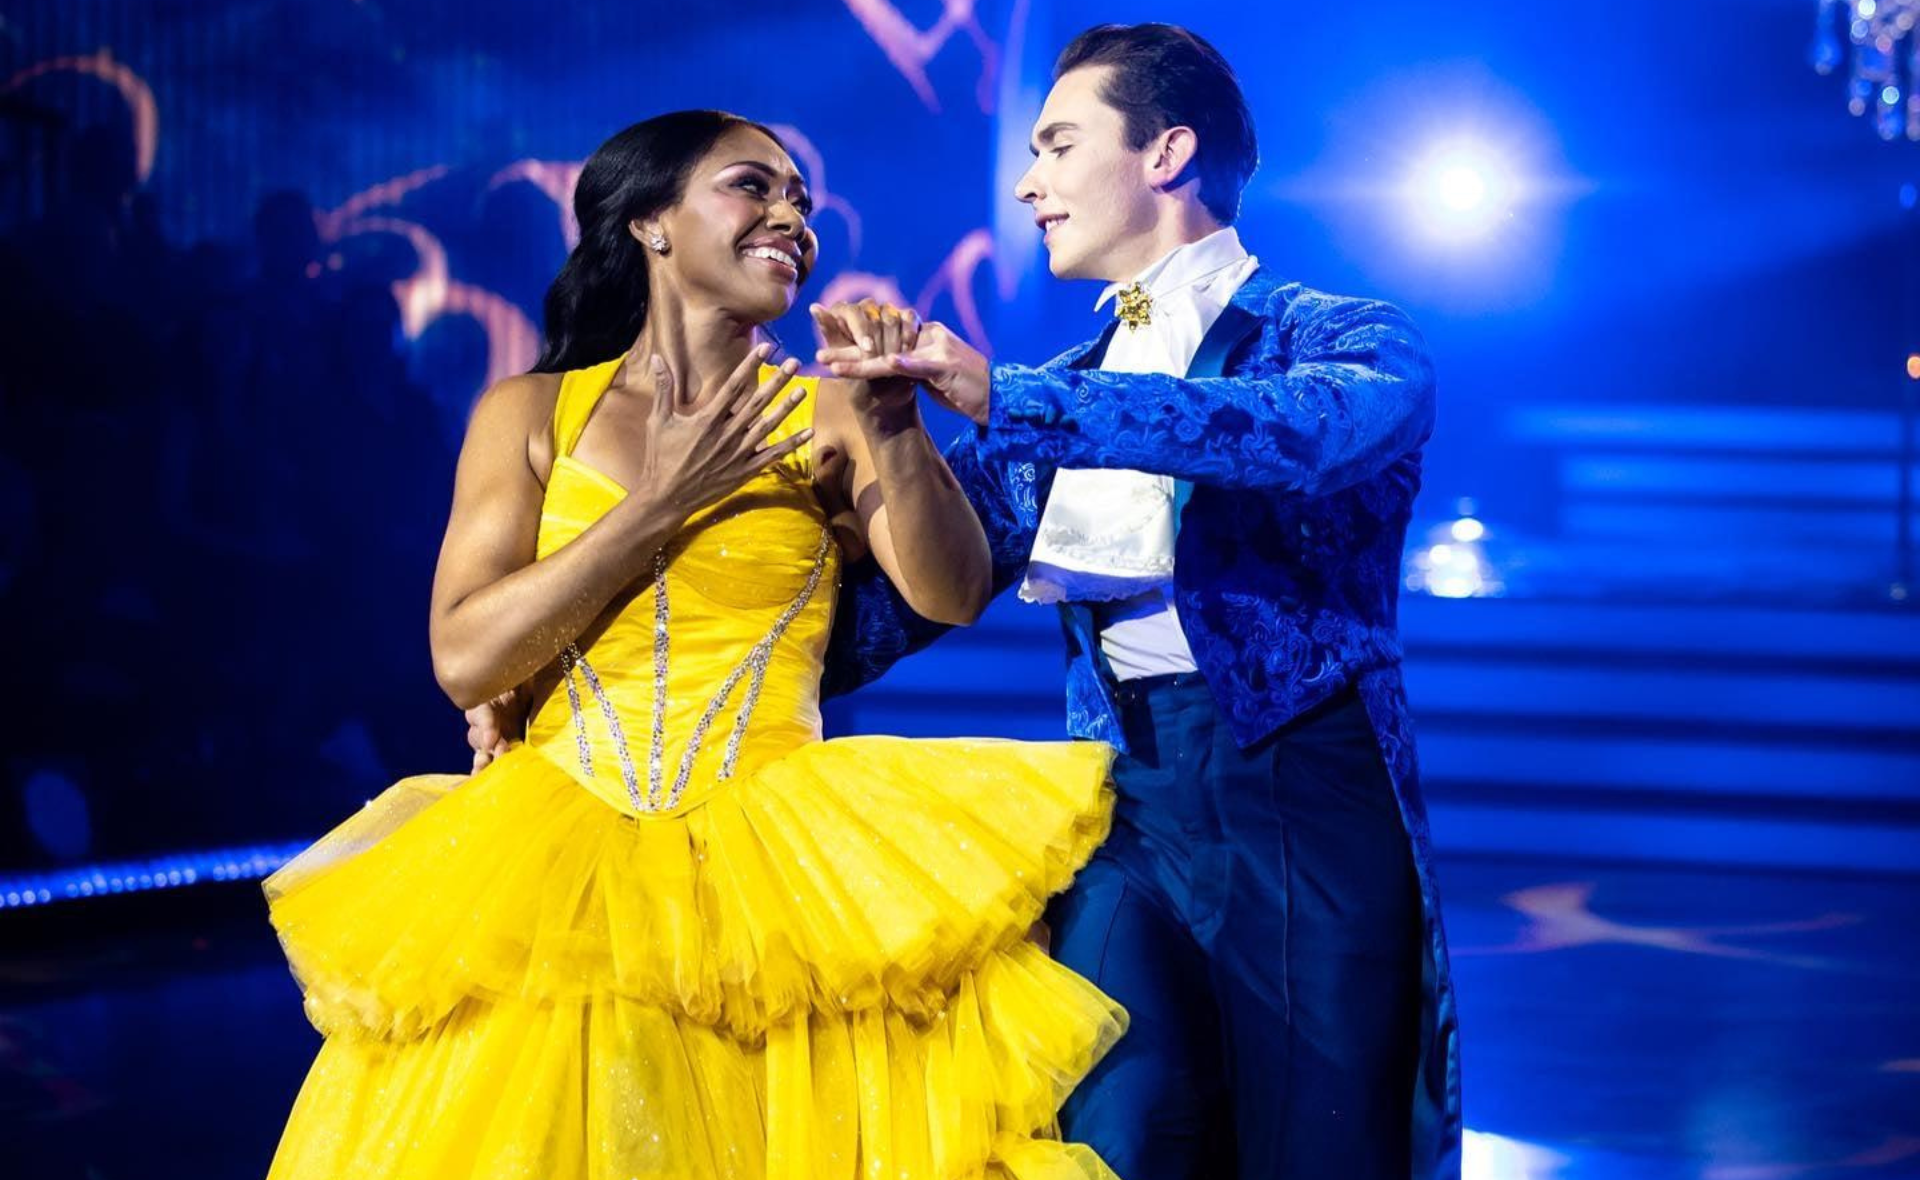 EXCLUSIVE: Former Australian Idol star Paulini reflects on her Dancing with the Stars journey